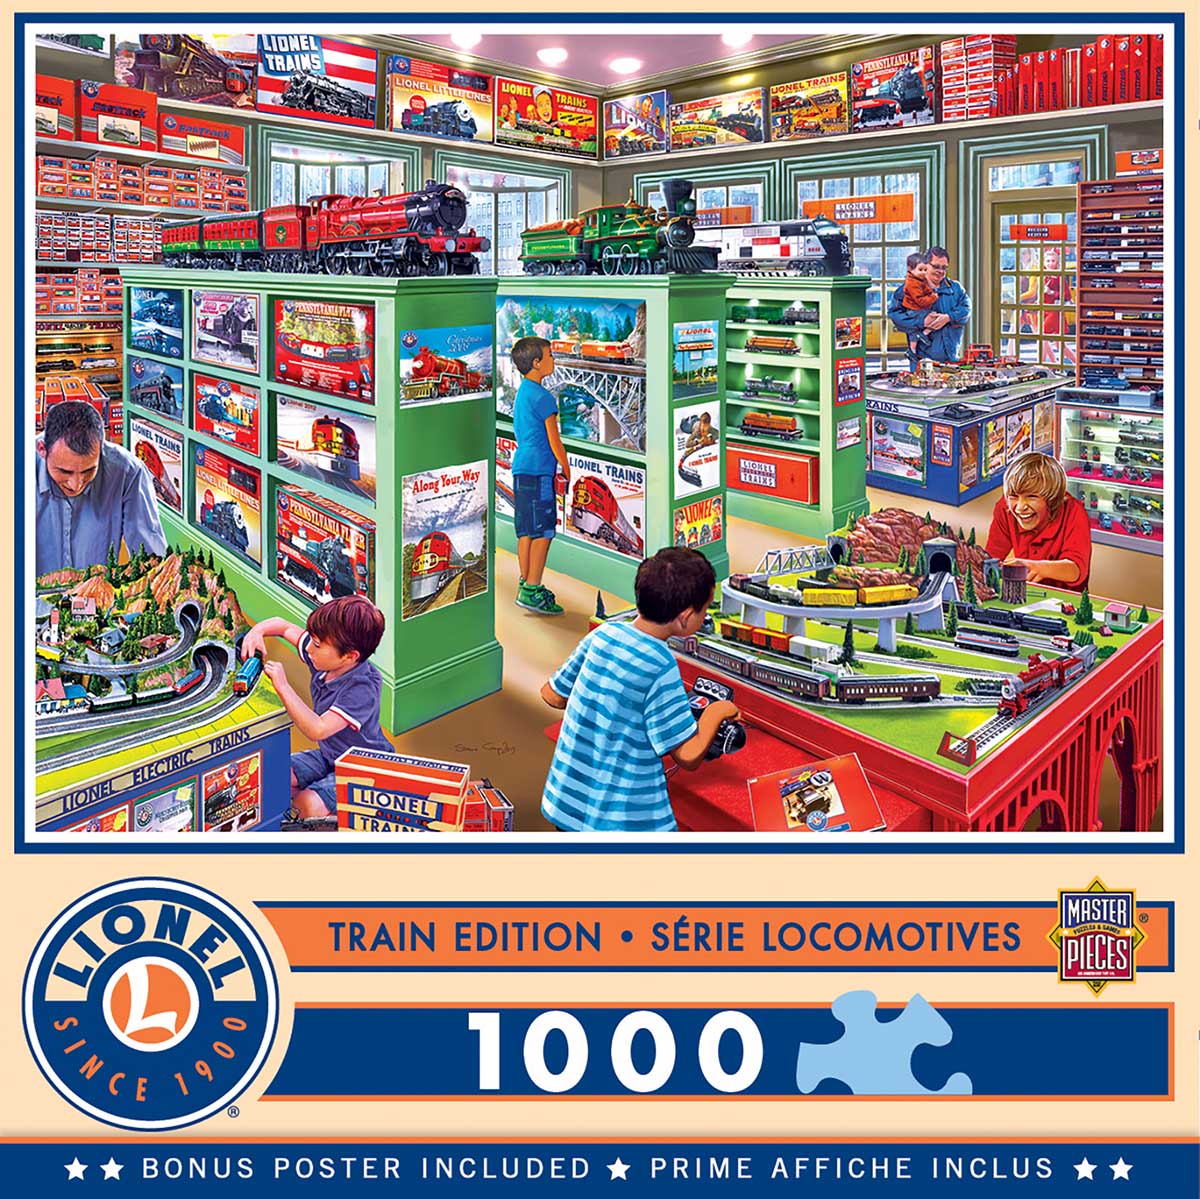 The Lionel Store - Scratch and Dent Train Jigsaw Puzzle